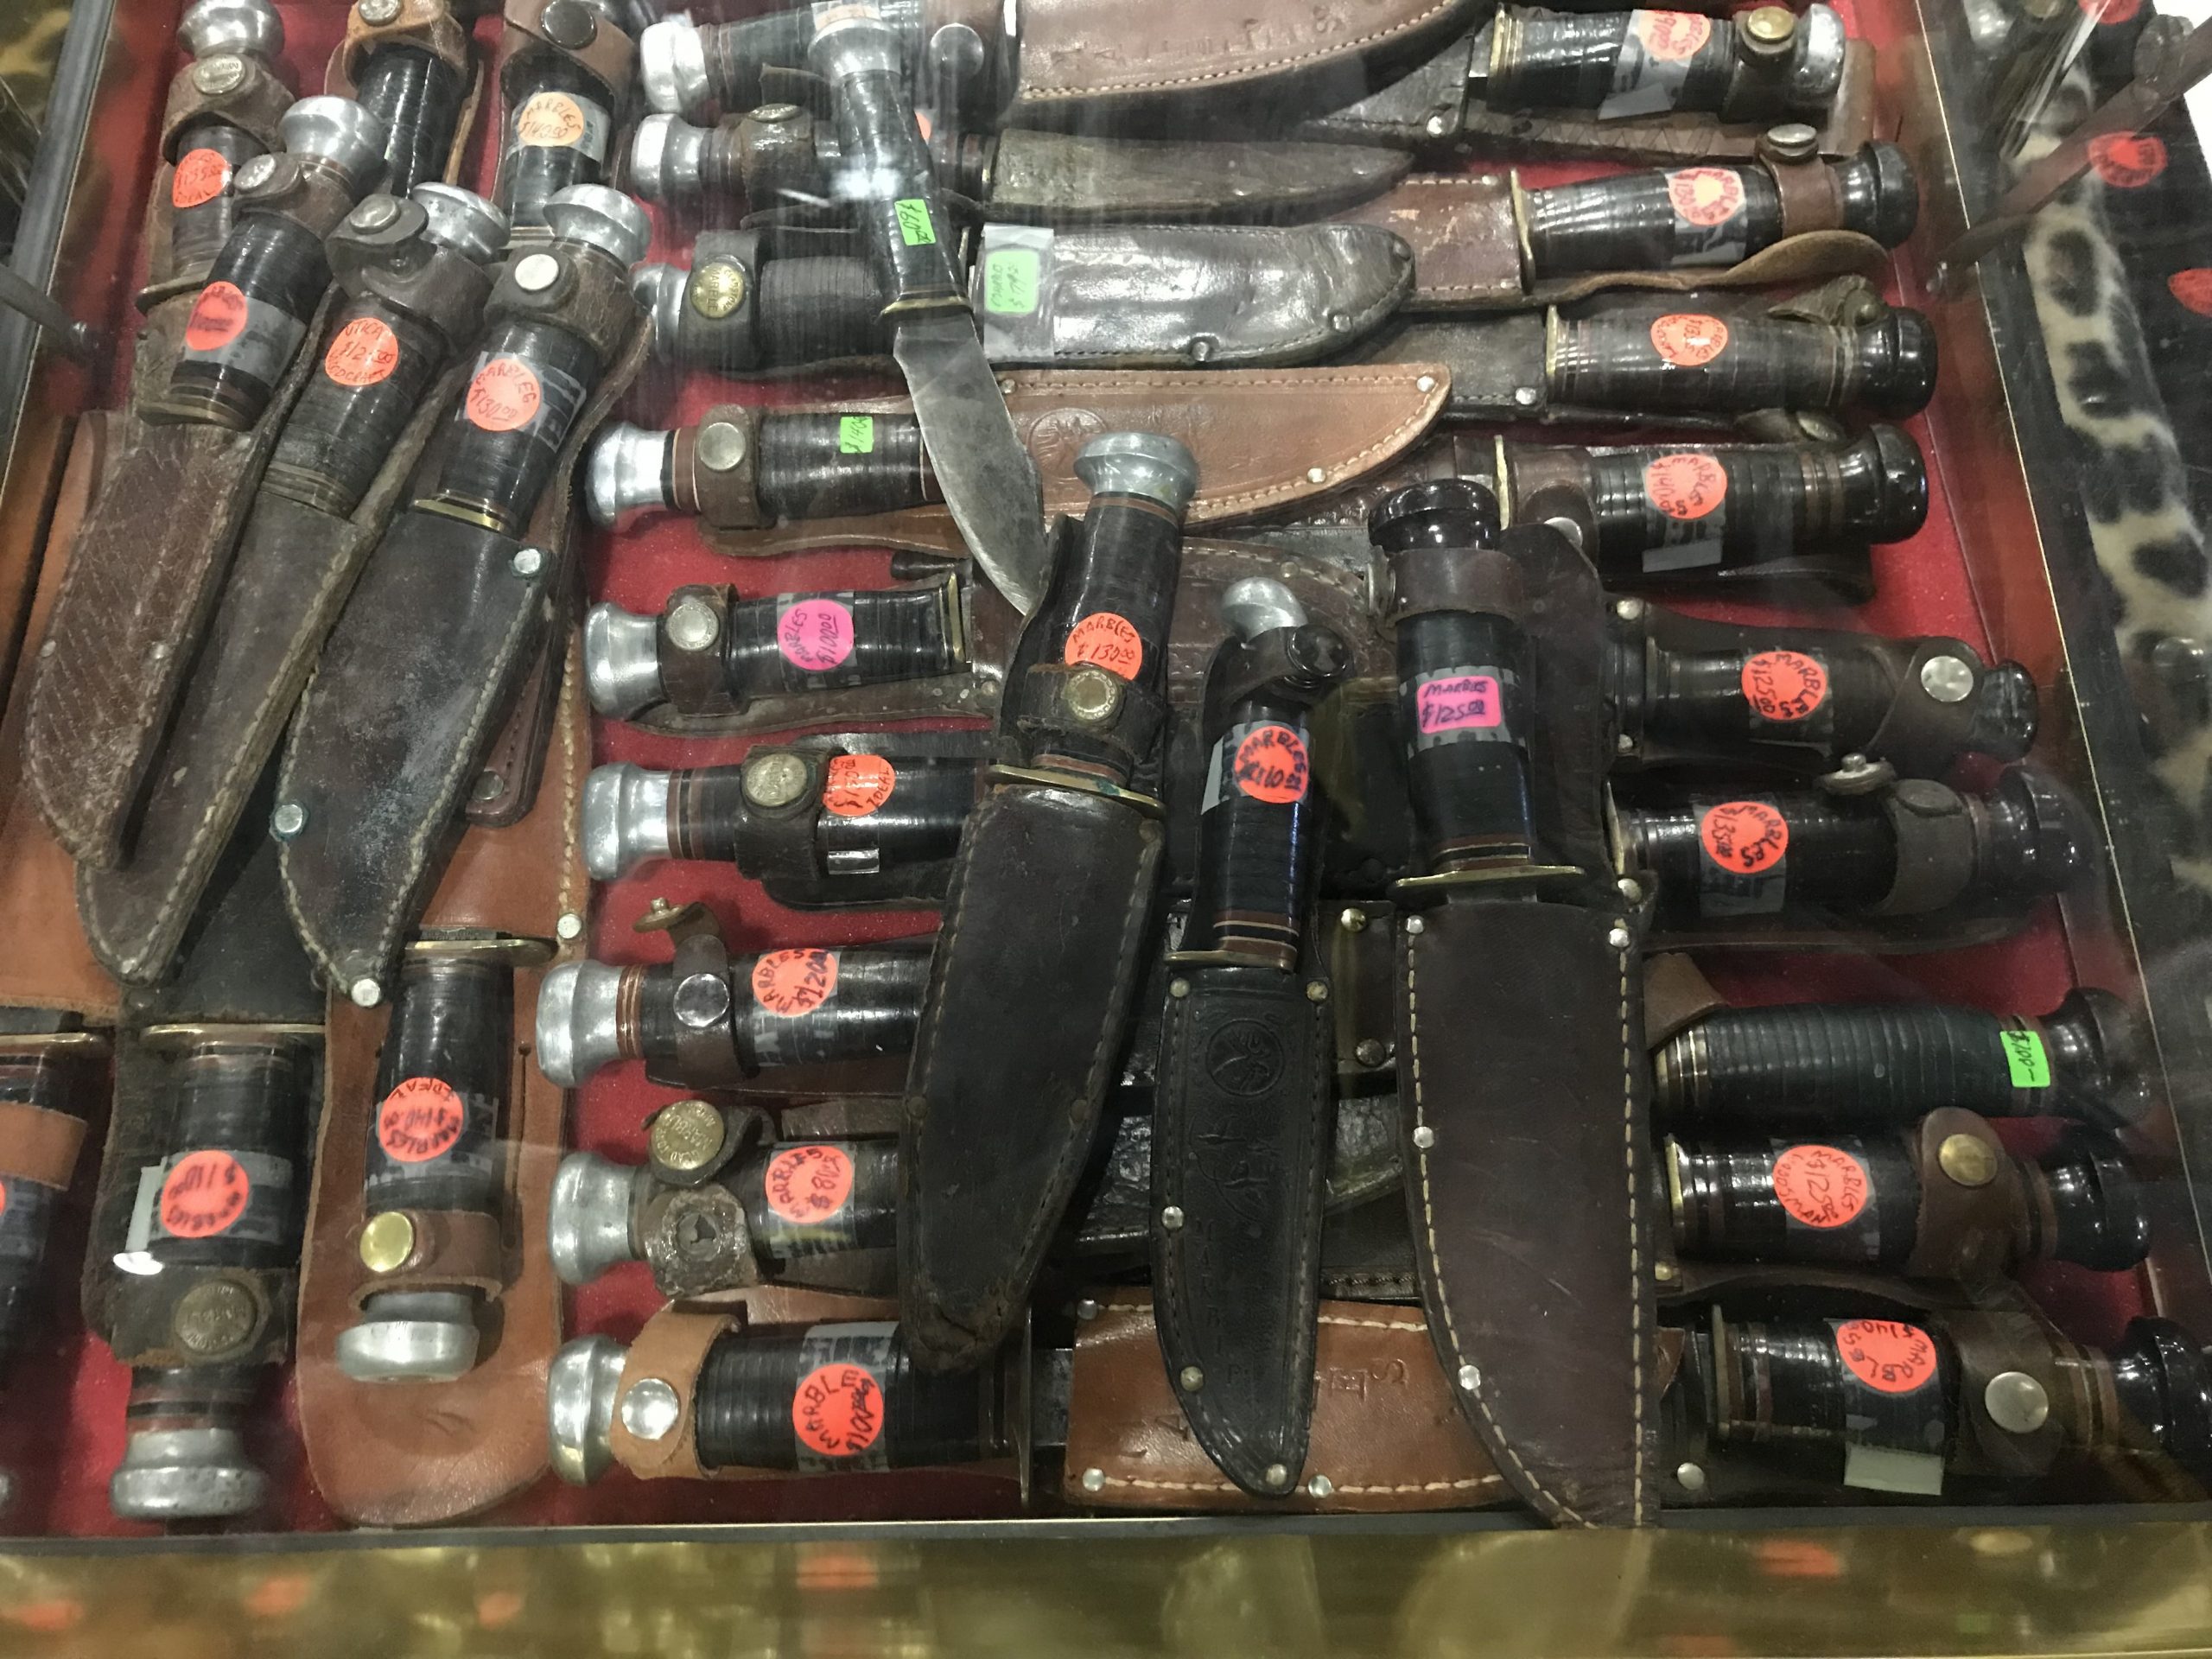 What happened to your grandfather's old hunting knife? Odds are it is at the gun show.